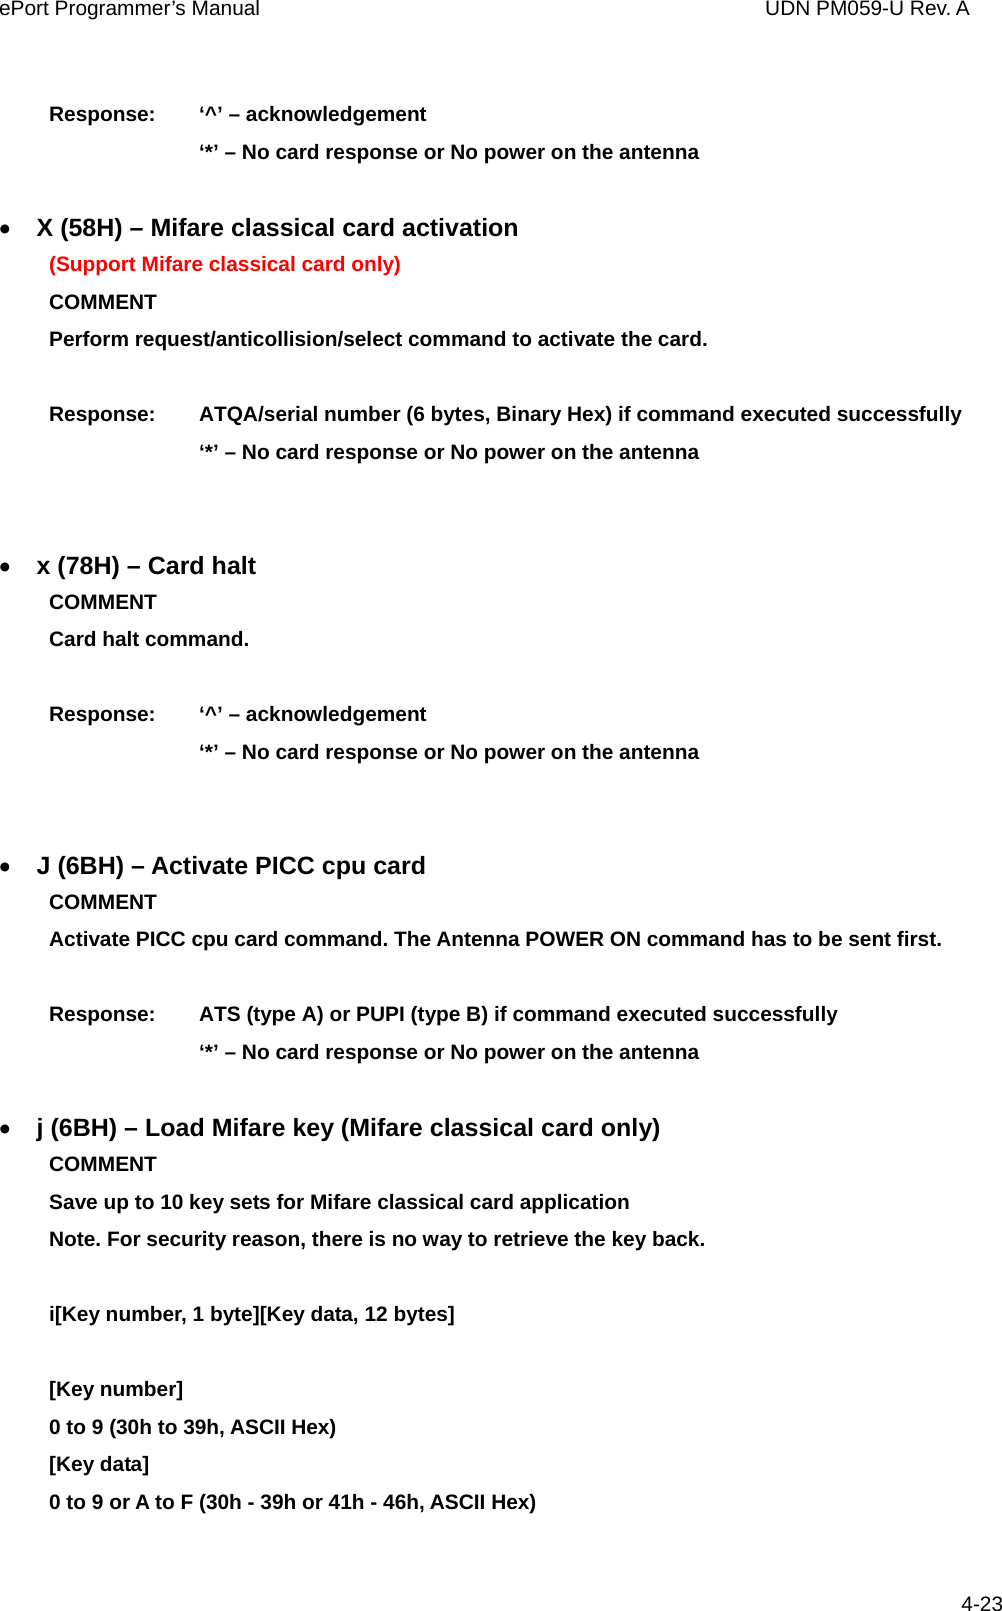 ePort Programmer’s Manual                                  UDN PM059-U Rev. A  4-23 Response:    ‘^’ – acknowledgement       ‘*’ – No card response or No power on the antenna  • X (58H) – Mifare classical card activation (Support Mifare classical card only) COMMENT  Perform request/anticollision/select command to activate the card.    Response:    ATQA/serial number (6 bytes, Binary Hex) if command executed successfully       ‘*’ – No card response or No power on the antenna   • x (78H) – Card halt COMMENT  Card halt command.      Response:    ‘^’ – acknowledgement       ‘*’ – No card response or No power on the antenna   • J (6BH) – Activate PICC cpu card COMMENT    Activate PICC cpu card command. The Antenna POWER ON command has to be sent first.  Response:    ATS (type A) or PUPI (type B) if command executed successfully       ‘*’ – No card response or No power on the antenna  • j (6BH) – Load Mifare key (Mifare classical card only) COMMENT    Save up to 10 key sets for Mifare classical card application   Note. For security reason, there is no way to retrieve the key back.  i[Key number, 1 byte][Key data, 12 bytes]  [Key number]   0 to 9 (30h to 39h, ASCII Hex) [Key data]   0 to 9 or A to F (30h - 39h or 41h - 46h, ASCII Hex)  